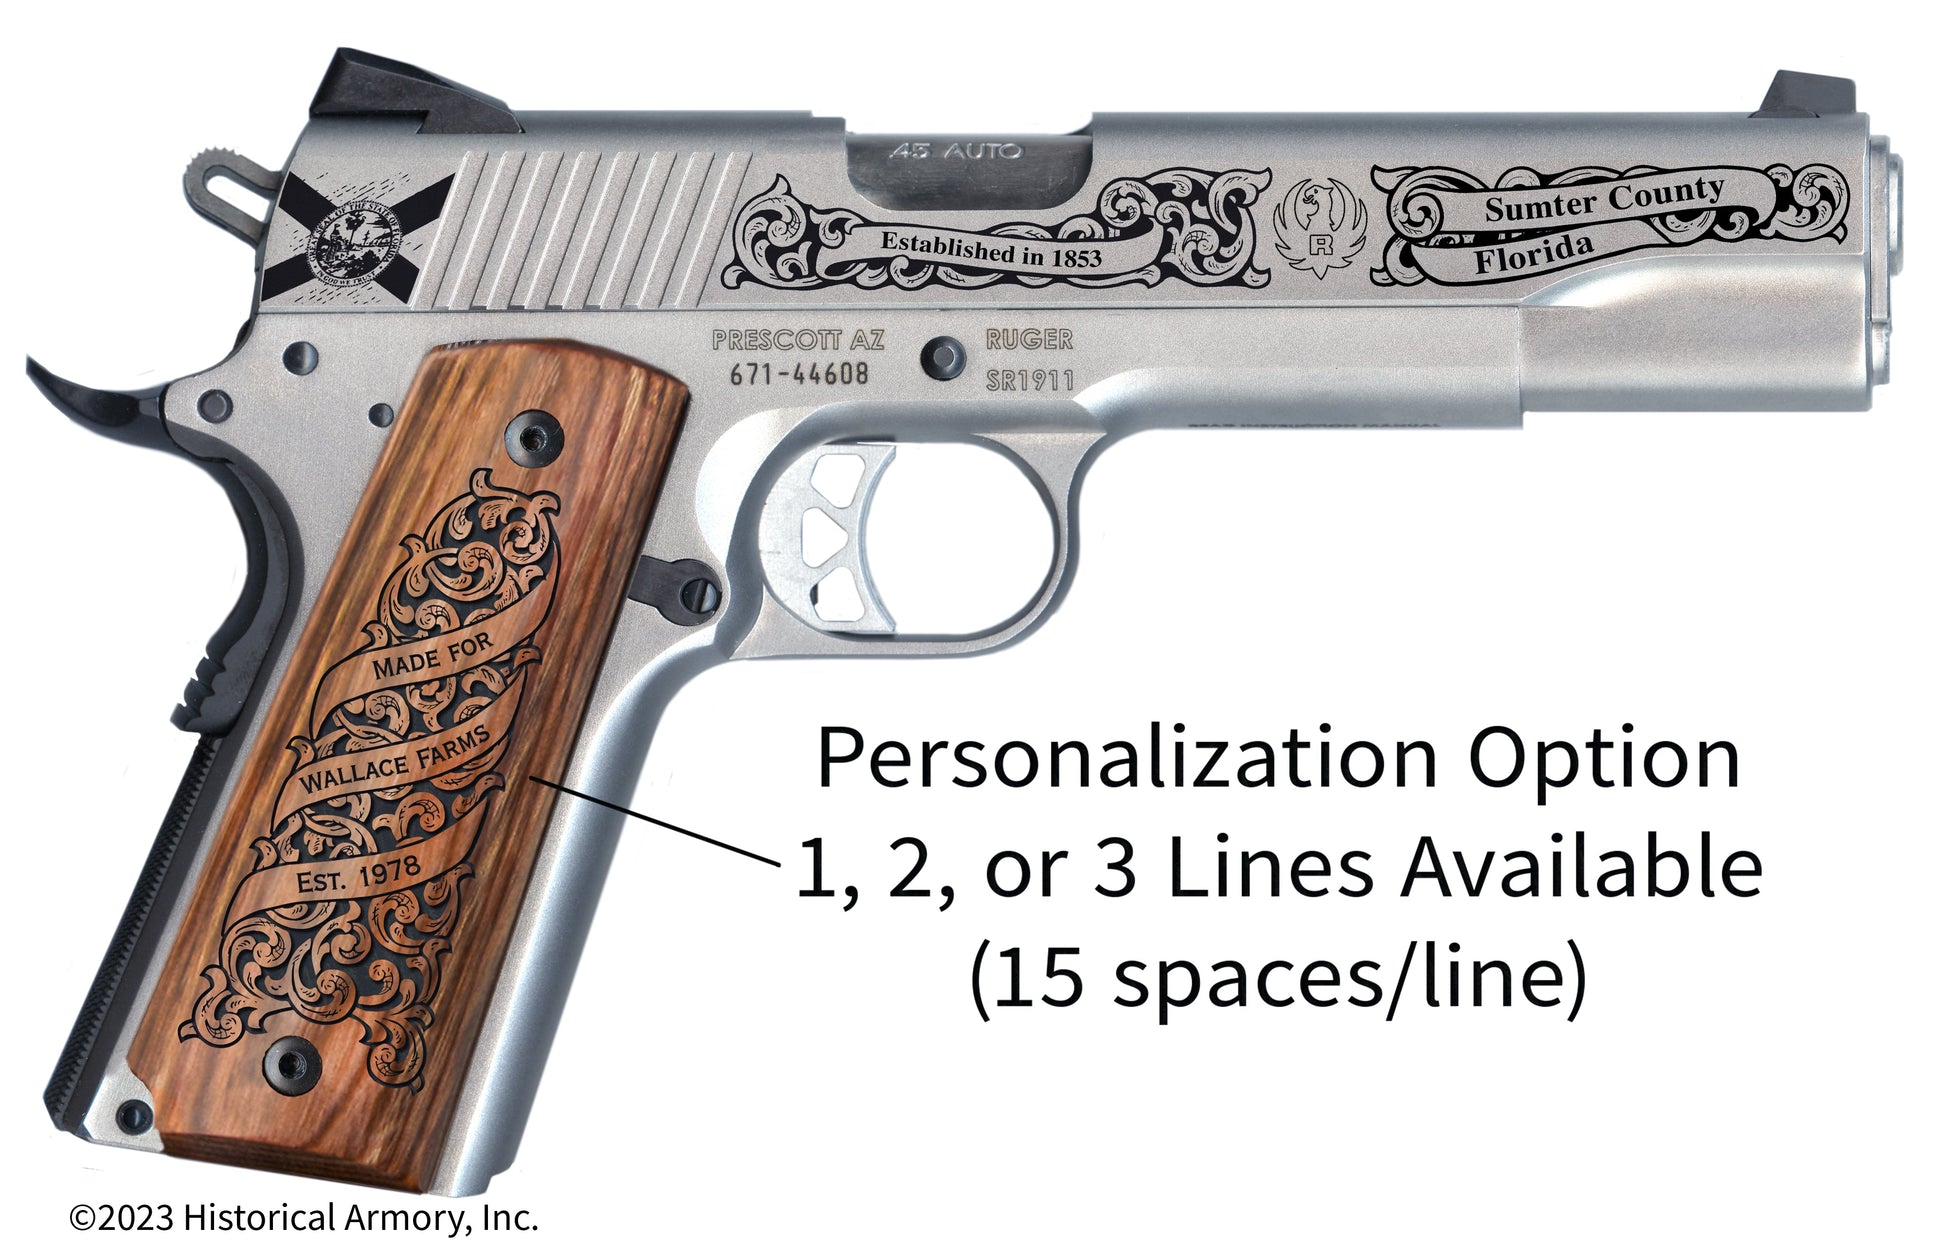 Sumter County Florida Personalized Engraved .45 Auto Ruger 1911